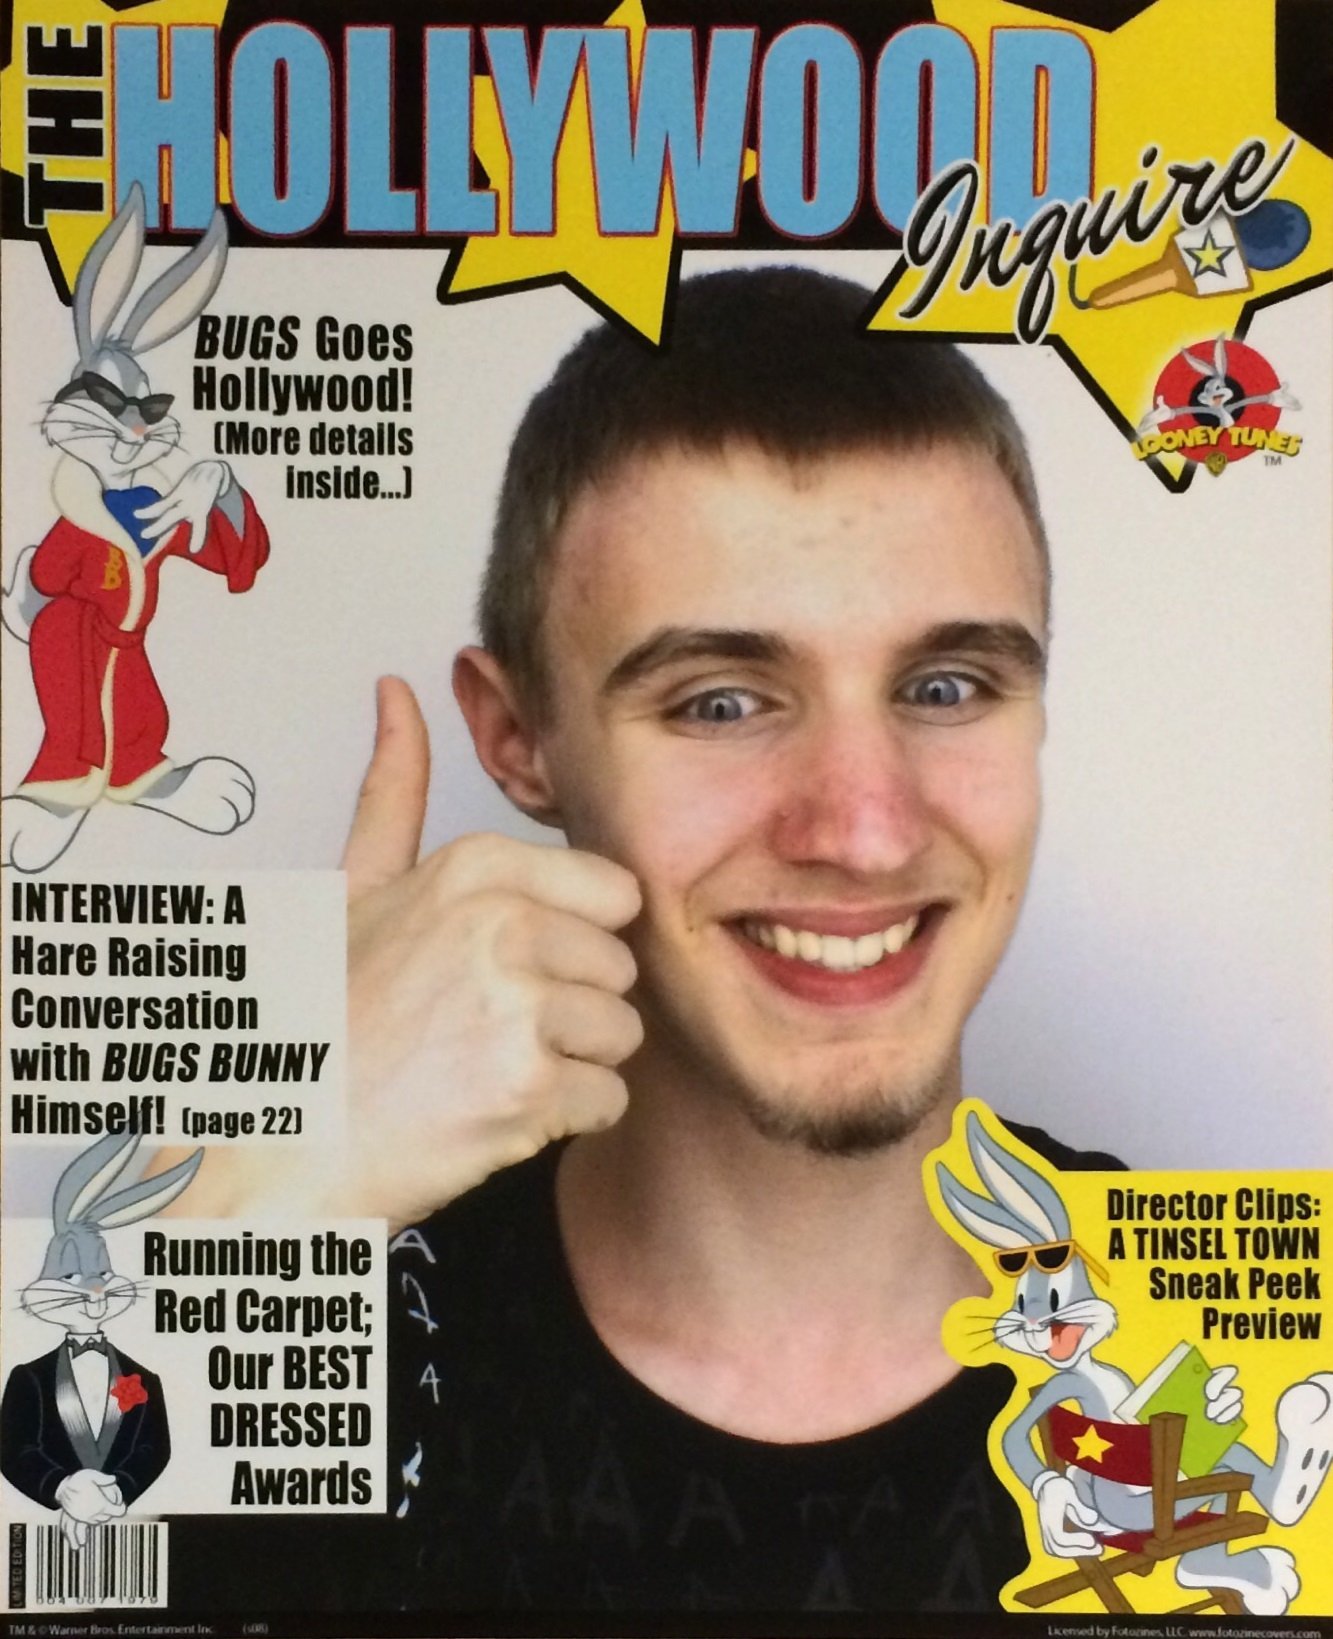 Check it out: quick-witted world-famous cartoon personality Bugs Bunny's immortalizing me in this brilliant magazine cover!